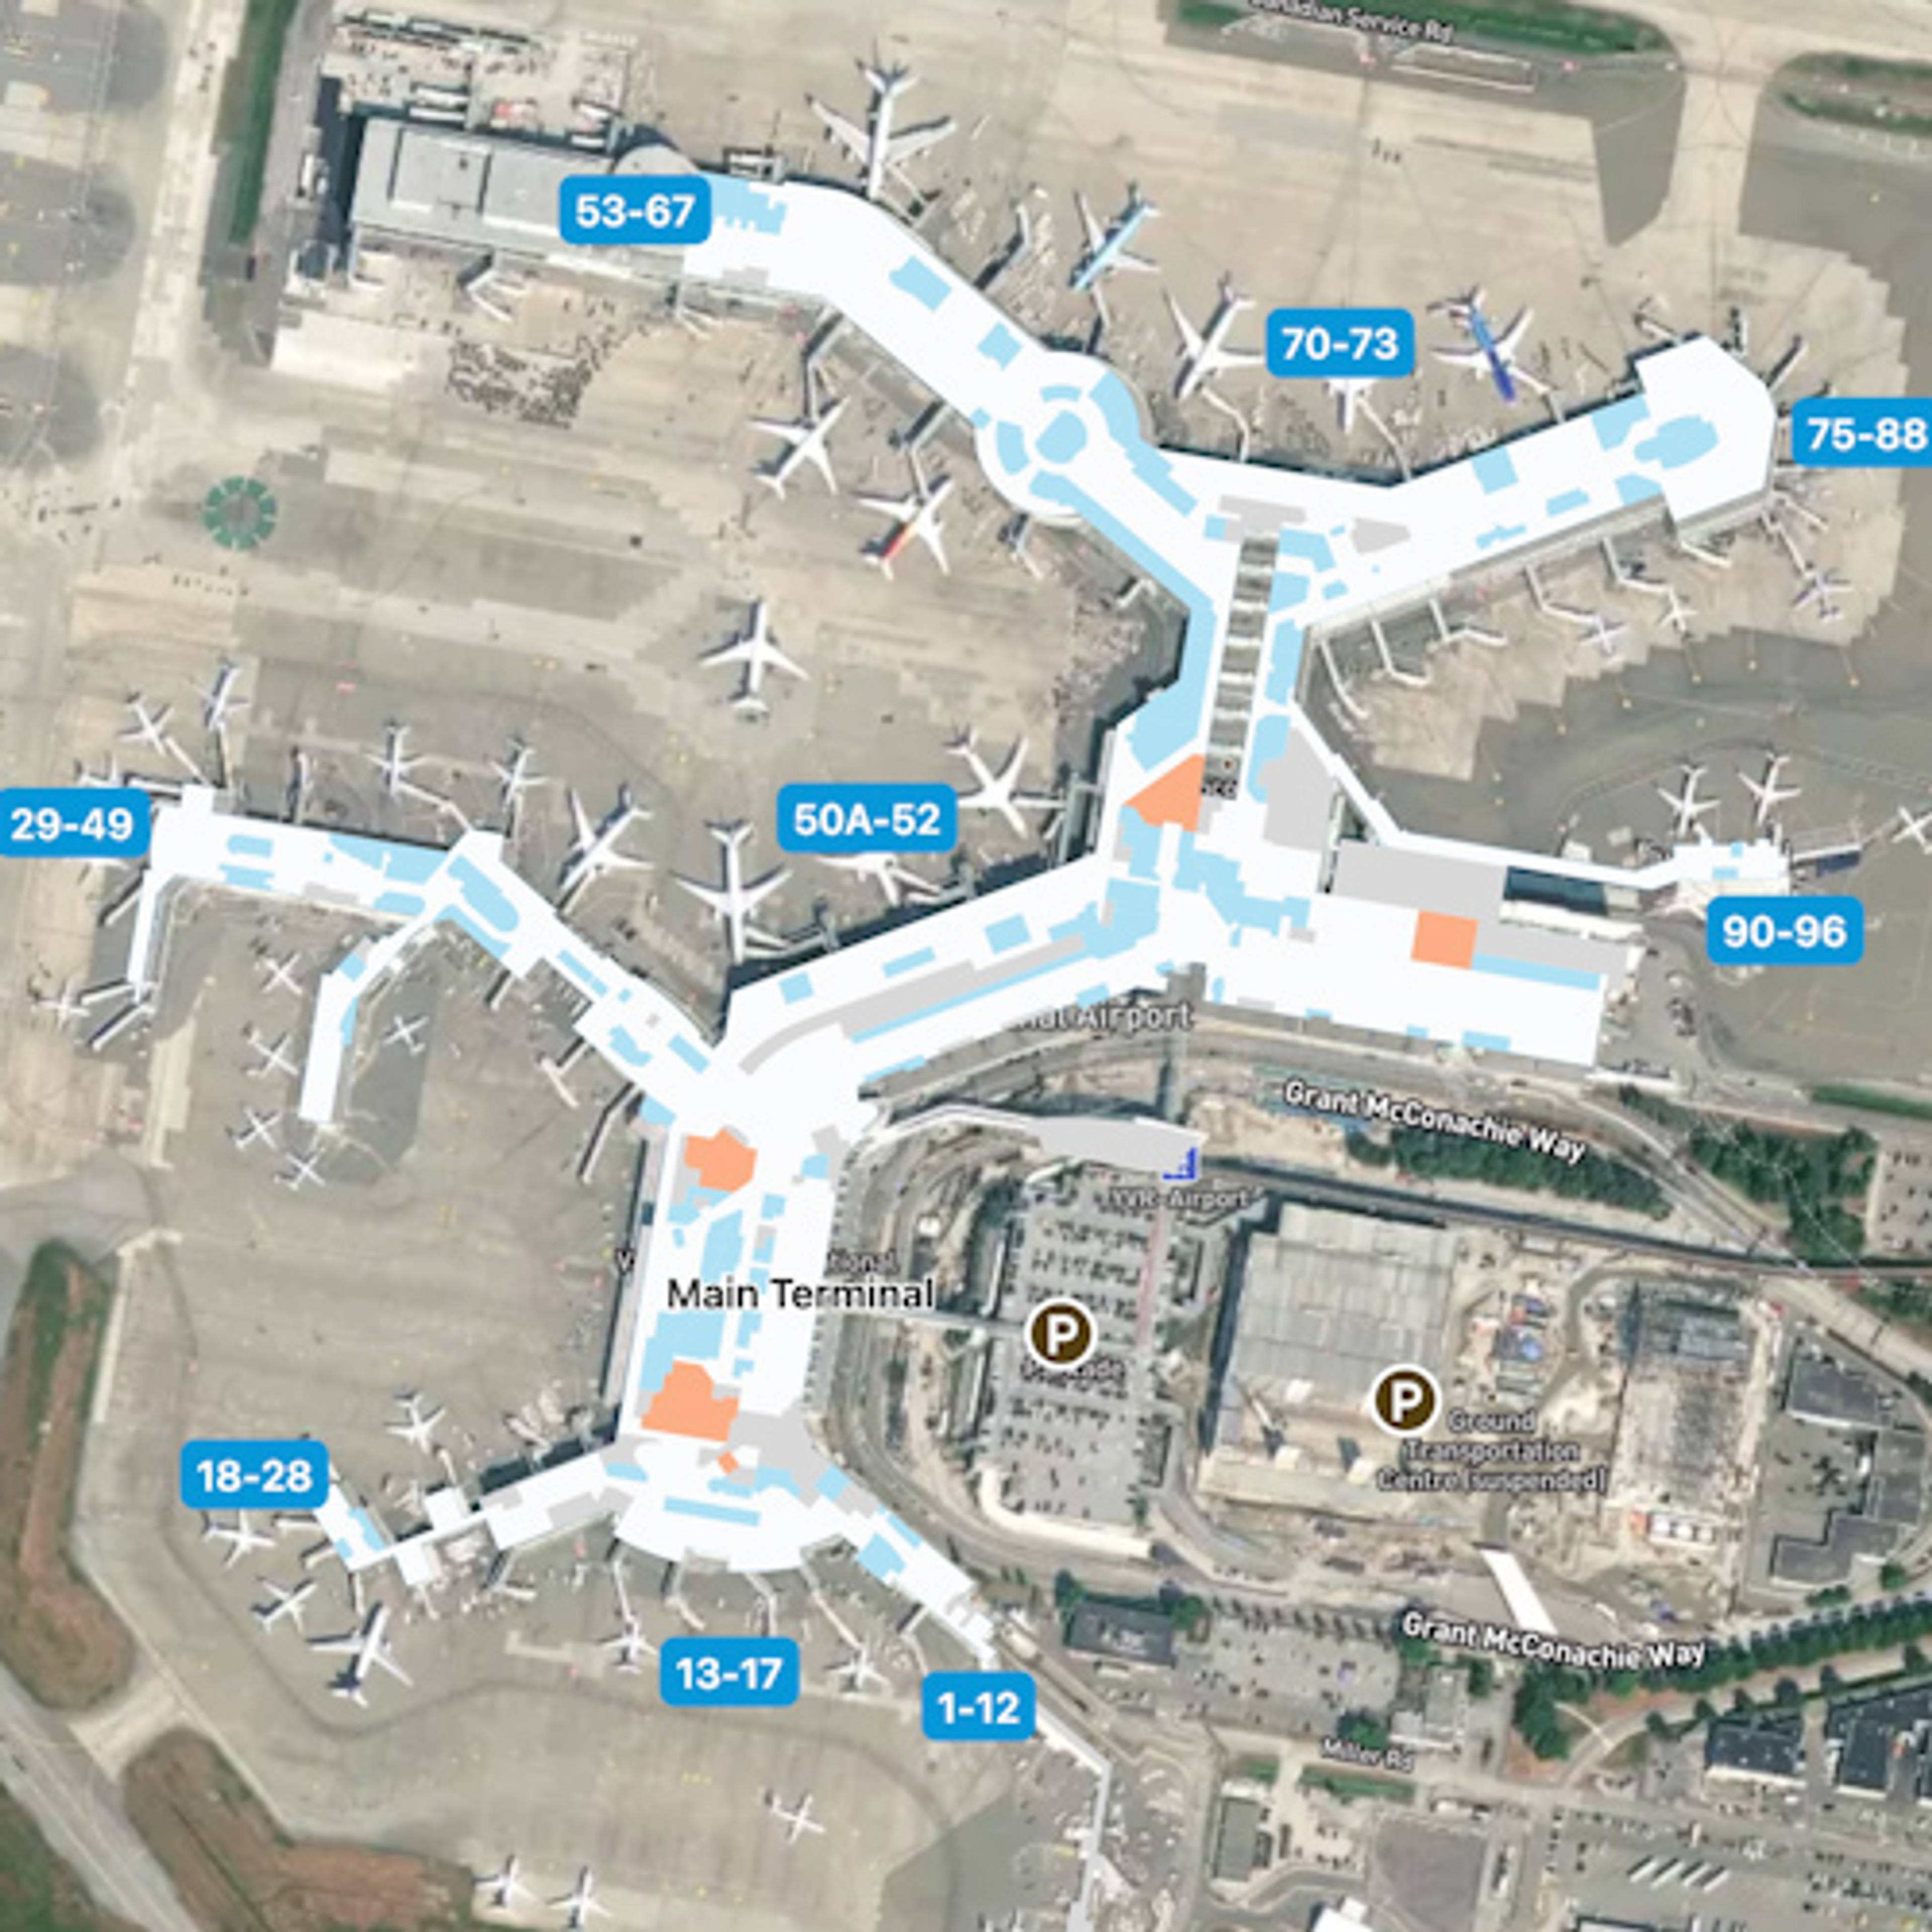 Richmond Airport Overview Map